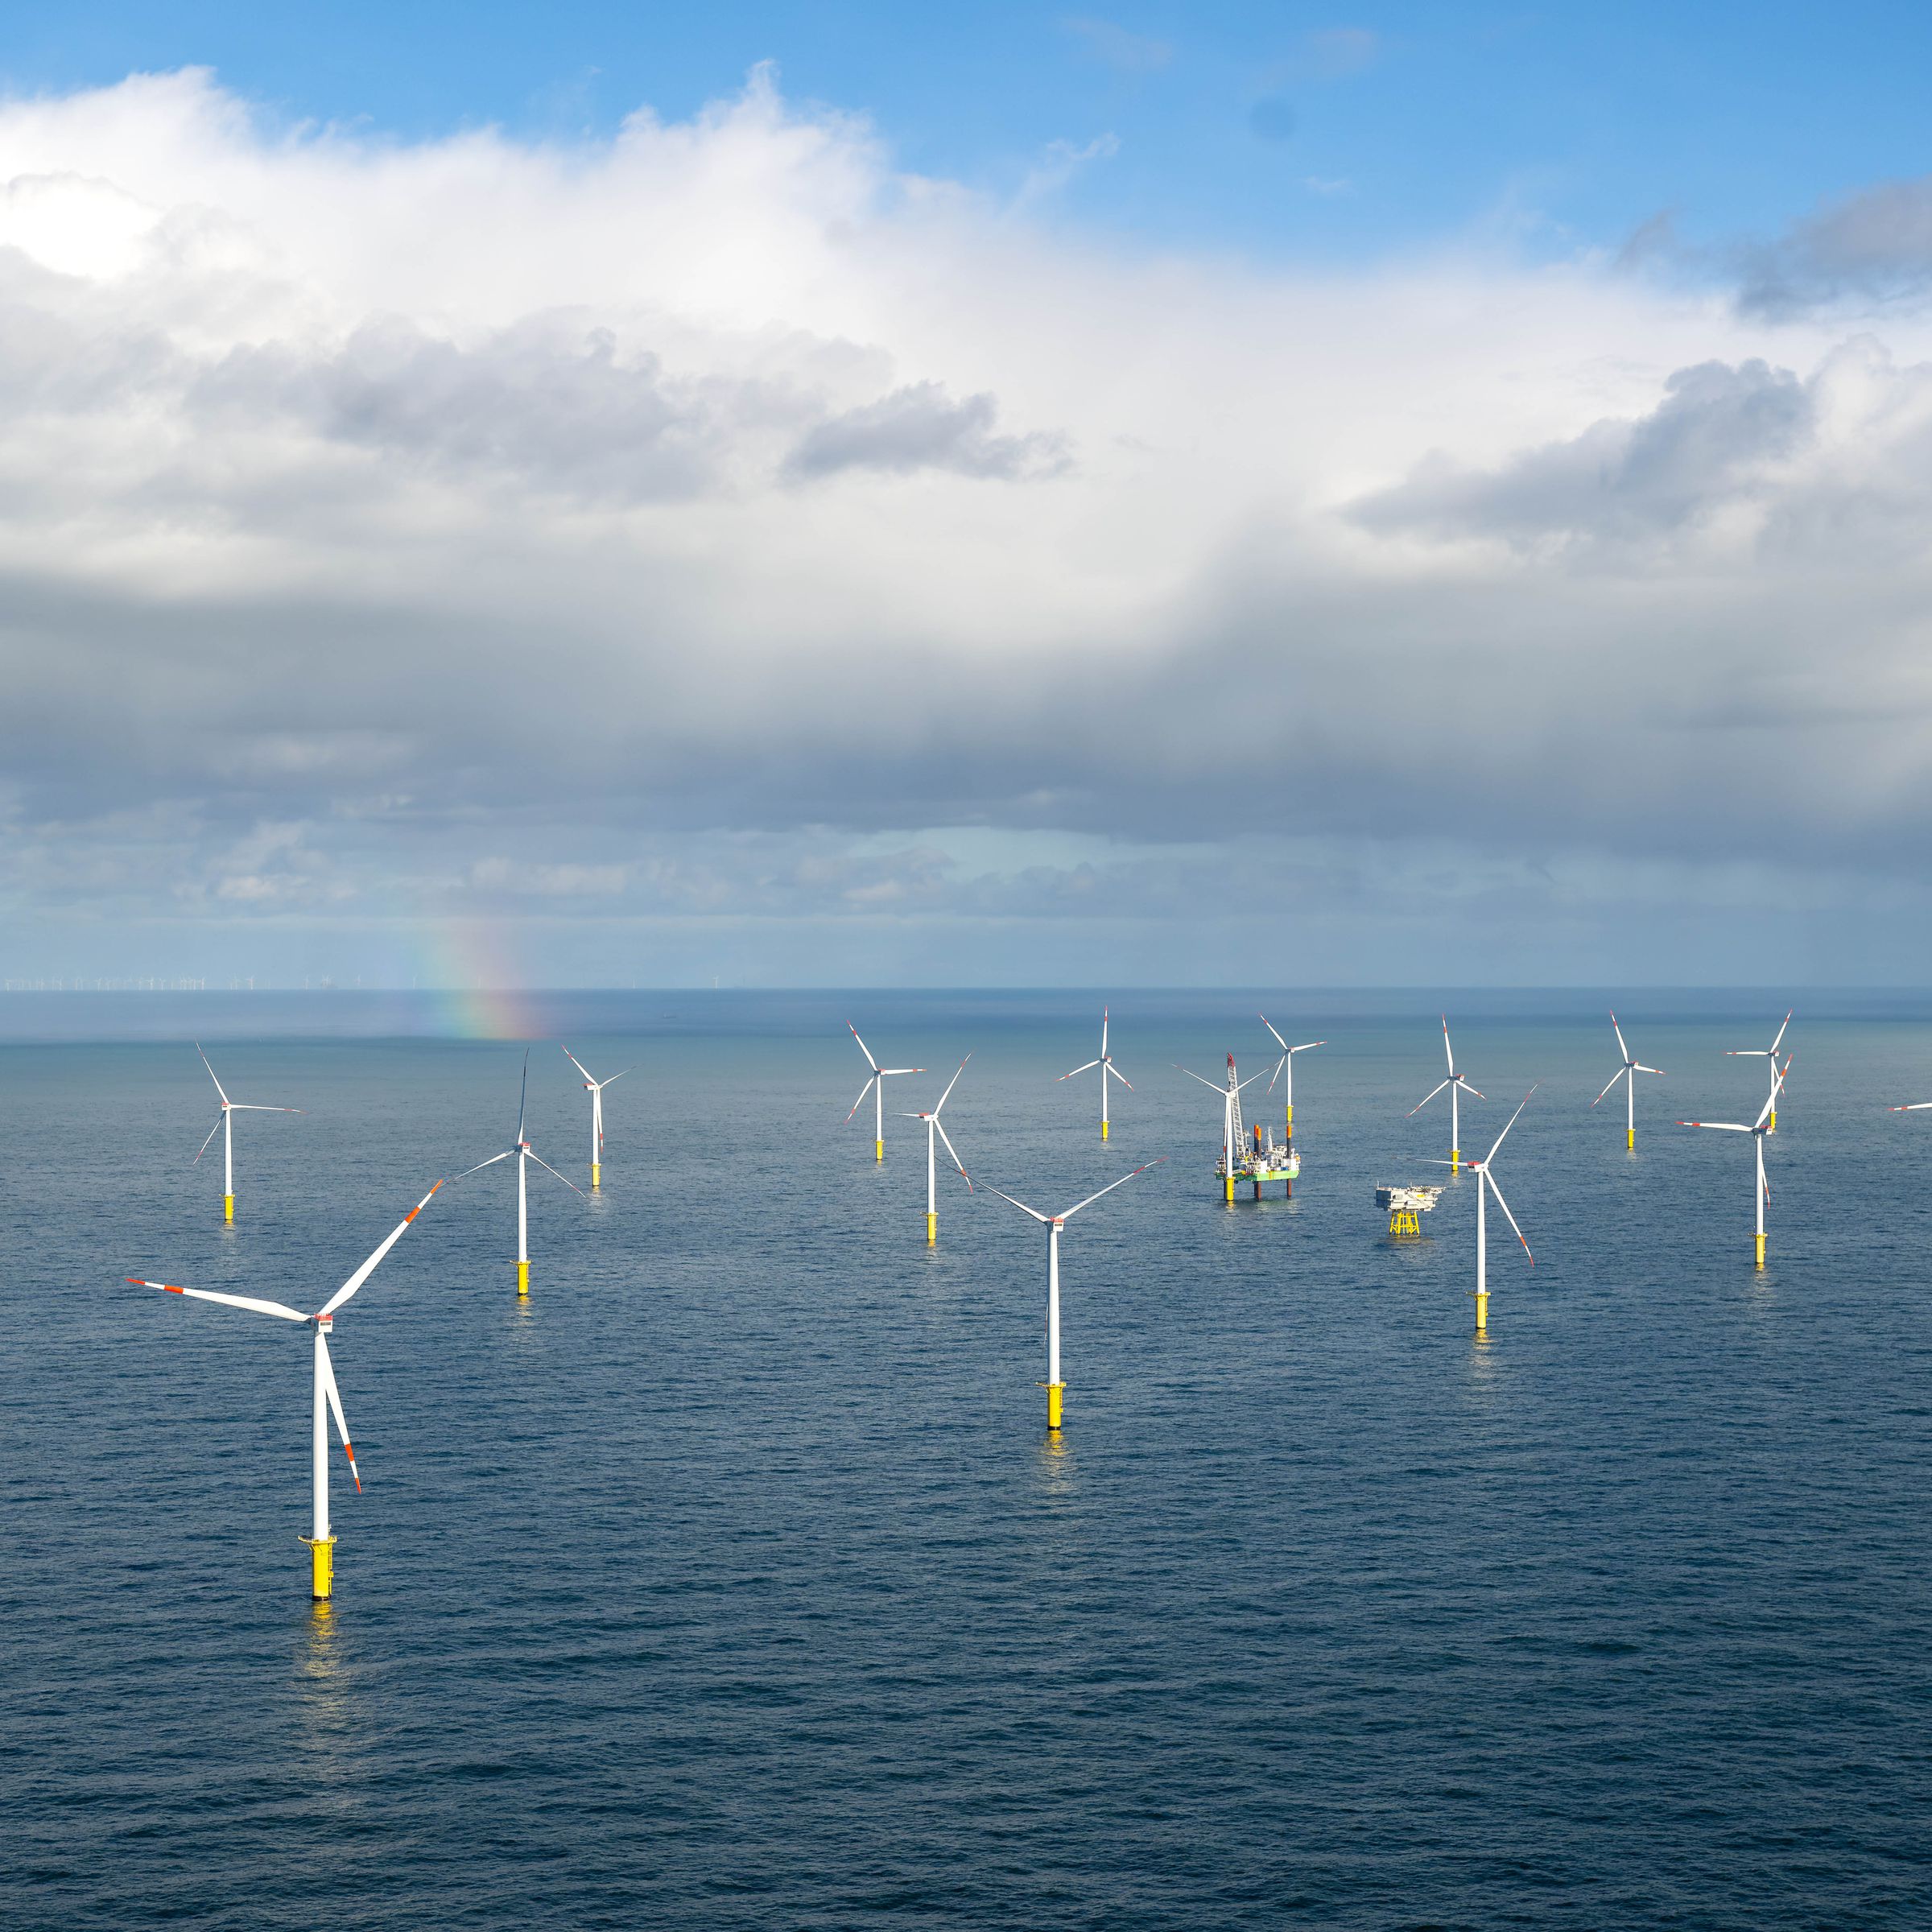 Several rows of wind turbines standing in the sea.